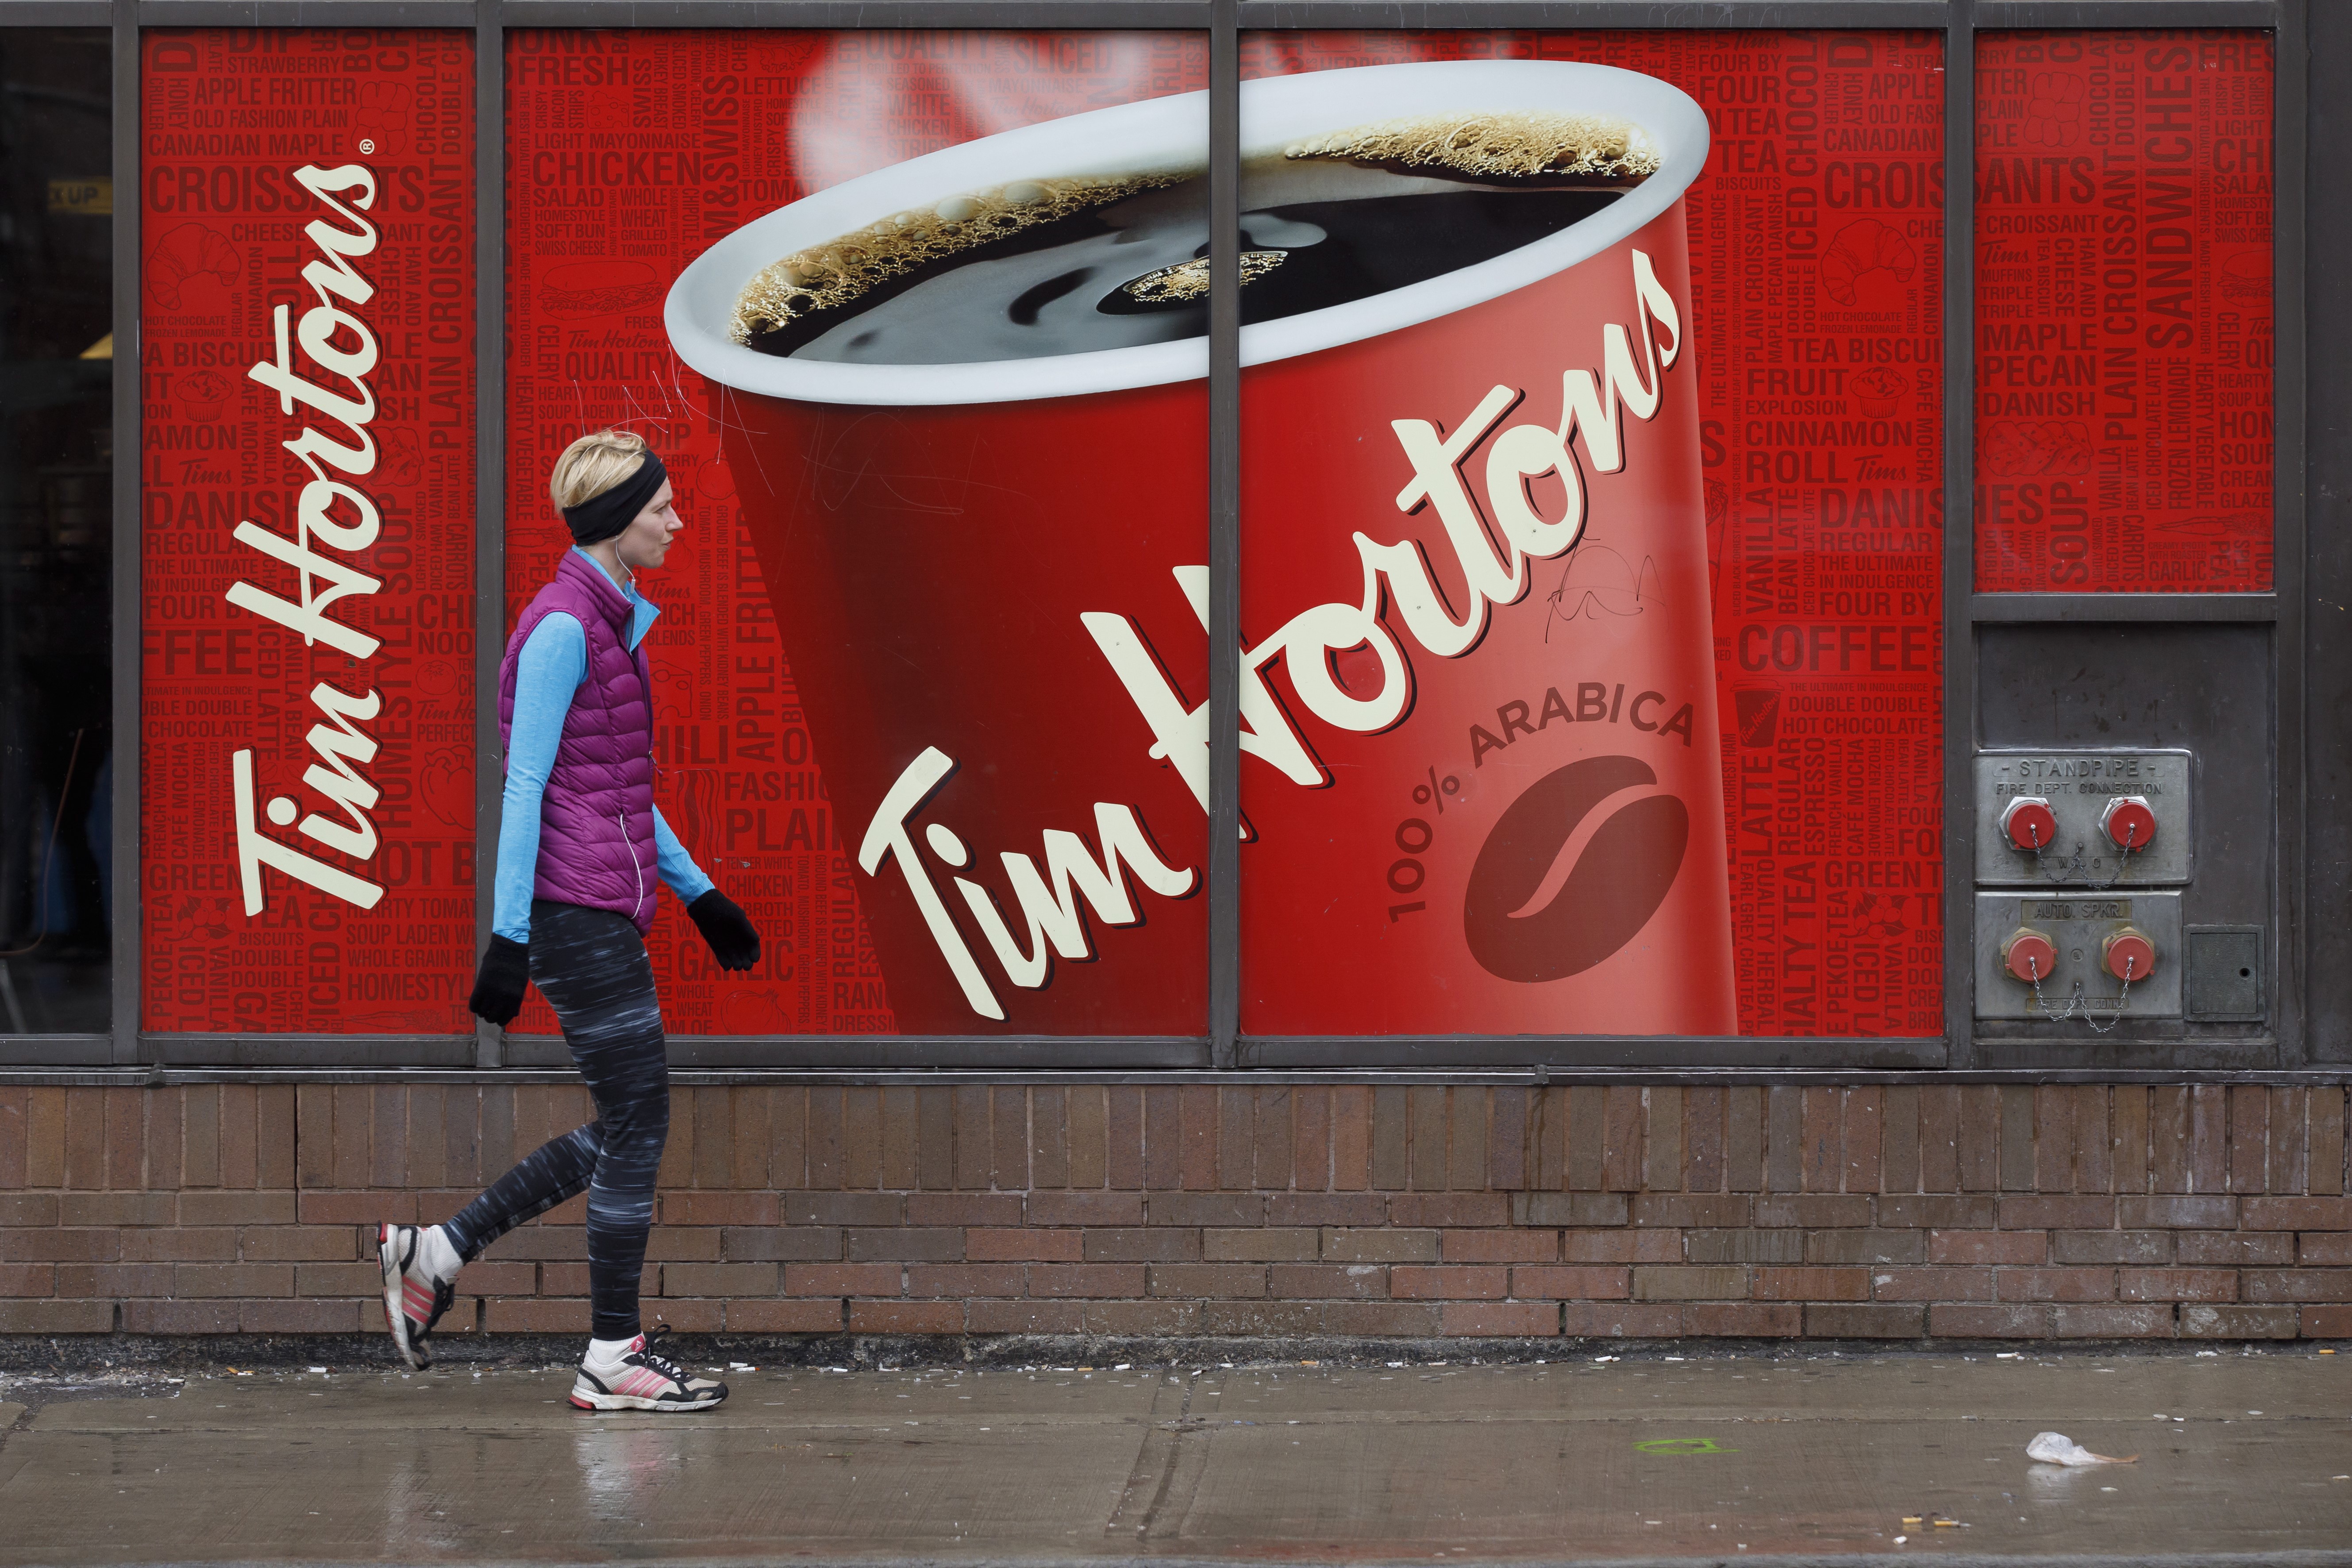 Privacy violations undermine the trustworthiness of the Tim Hortons brand